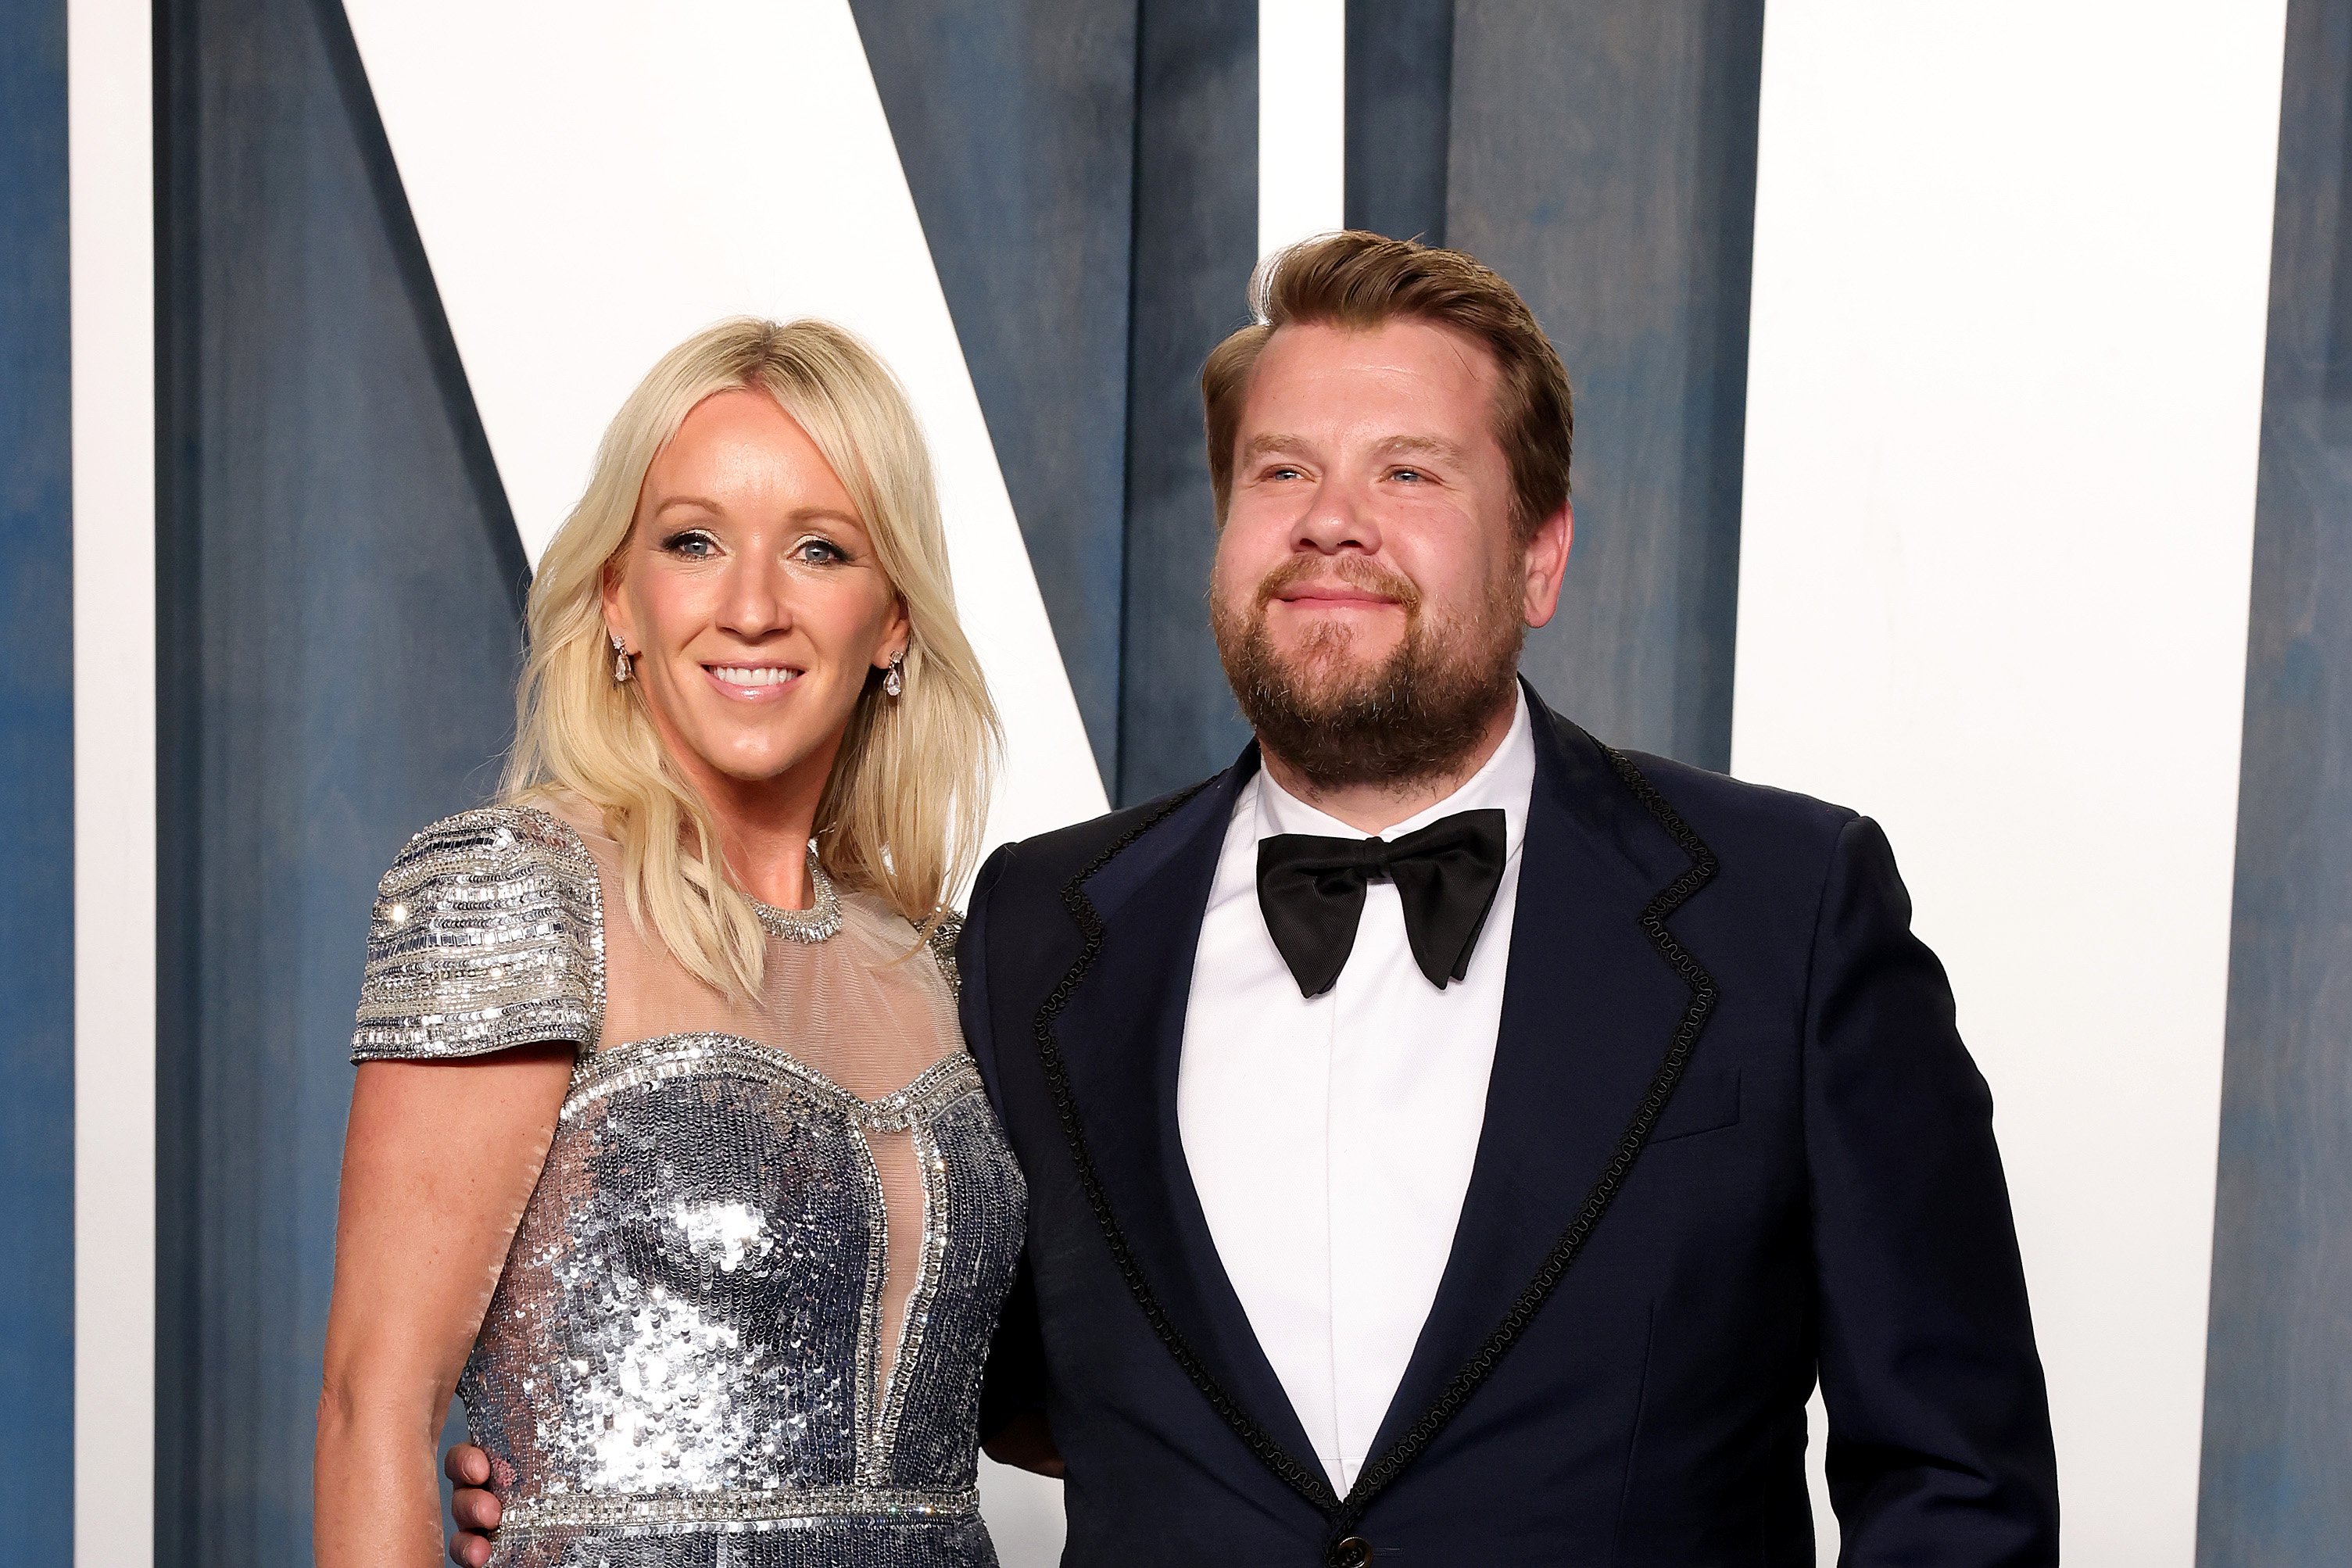 Julia Carey and James Corden at Wallis Annenberg Center for the Performing Arts on March 27, 2022, in Beverly Hills, California. | Source: Getty Images